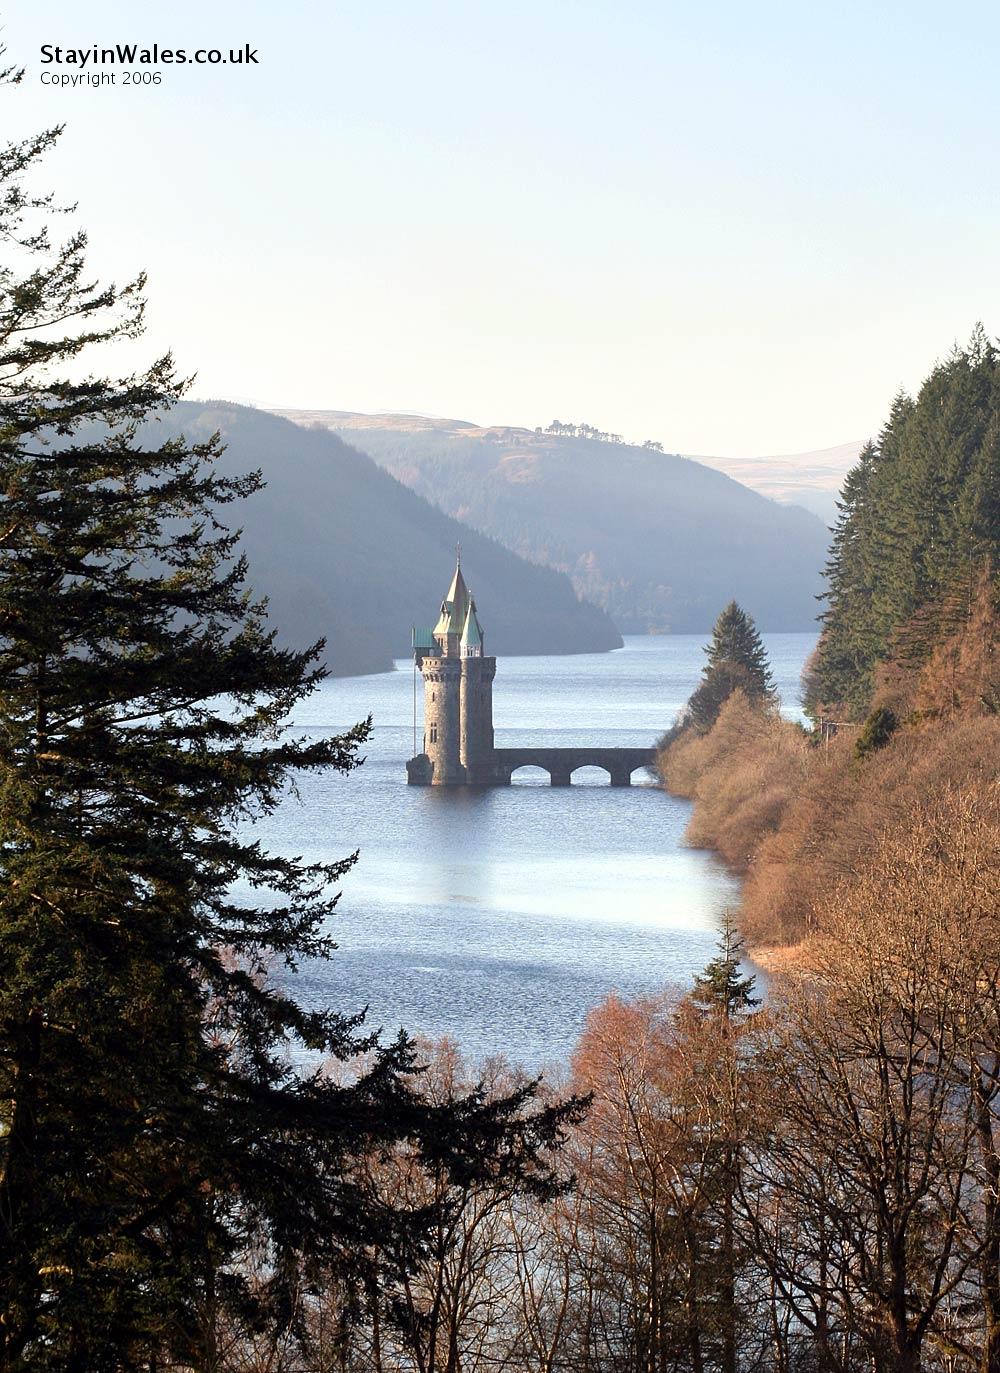 View from the Lake Vyrnwy Hotel